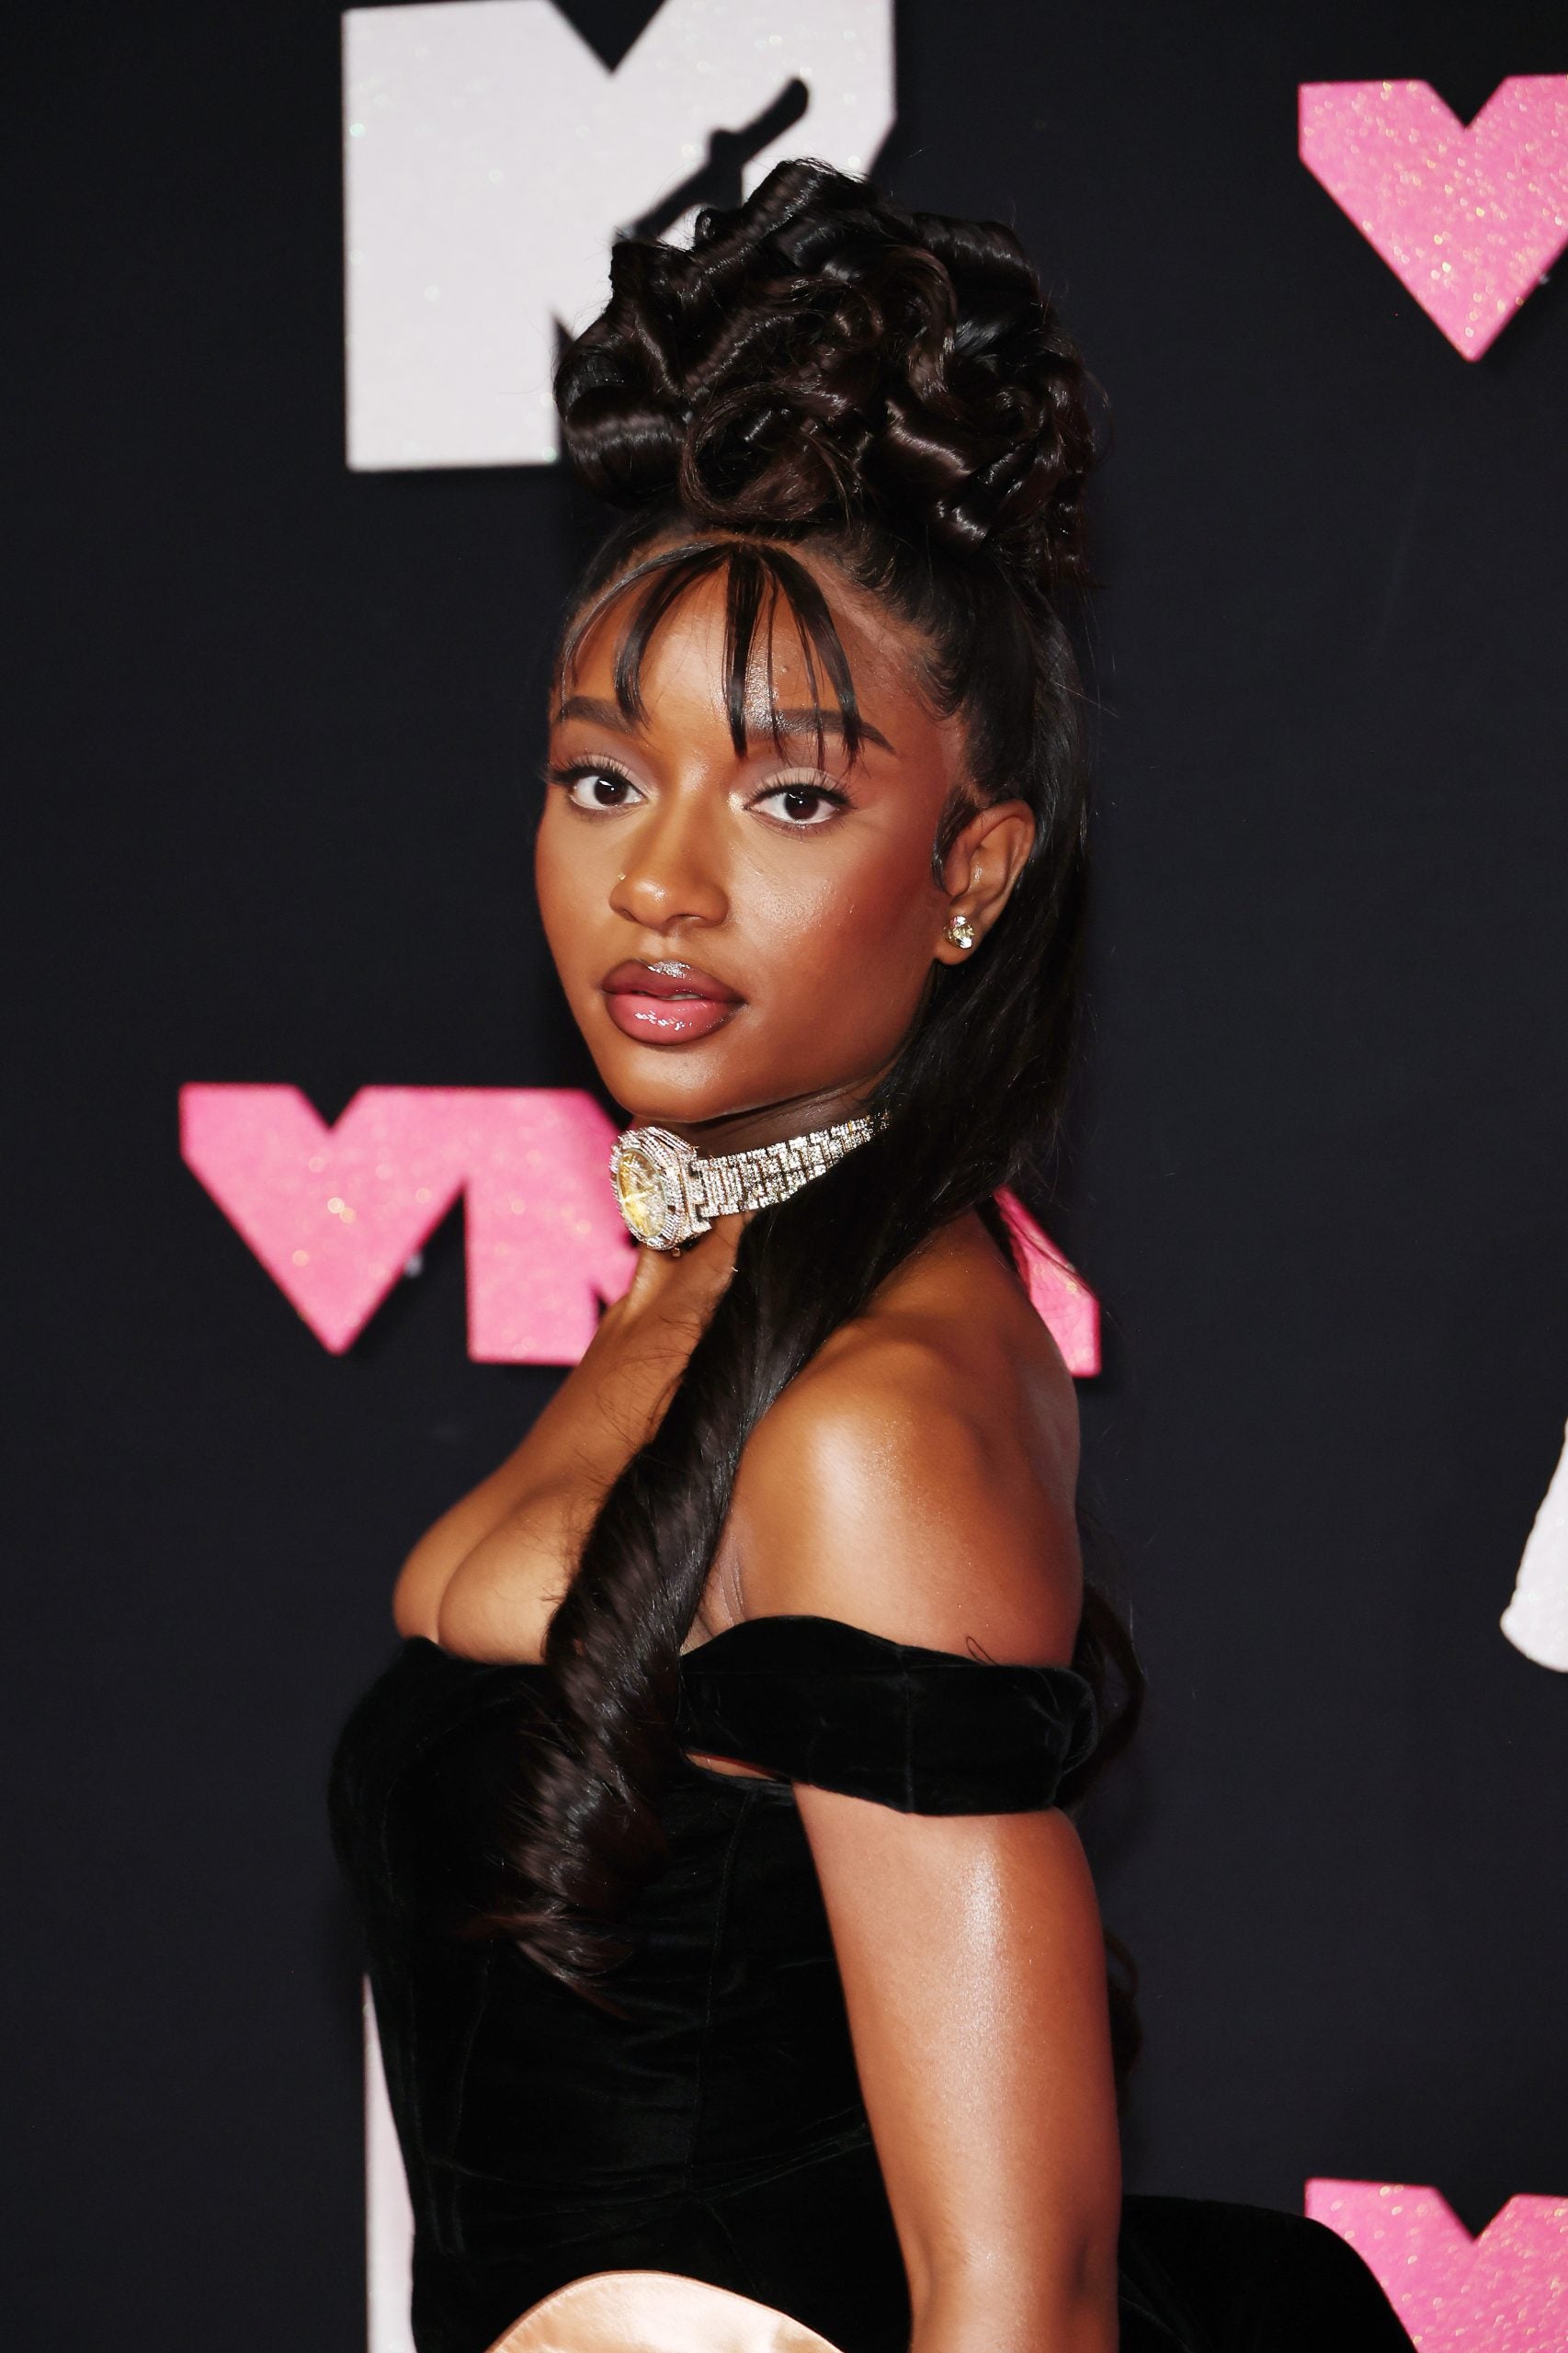 The 10 Best Beauty Looks From The 2023 VMAs